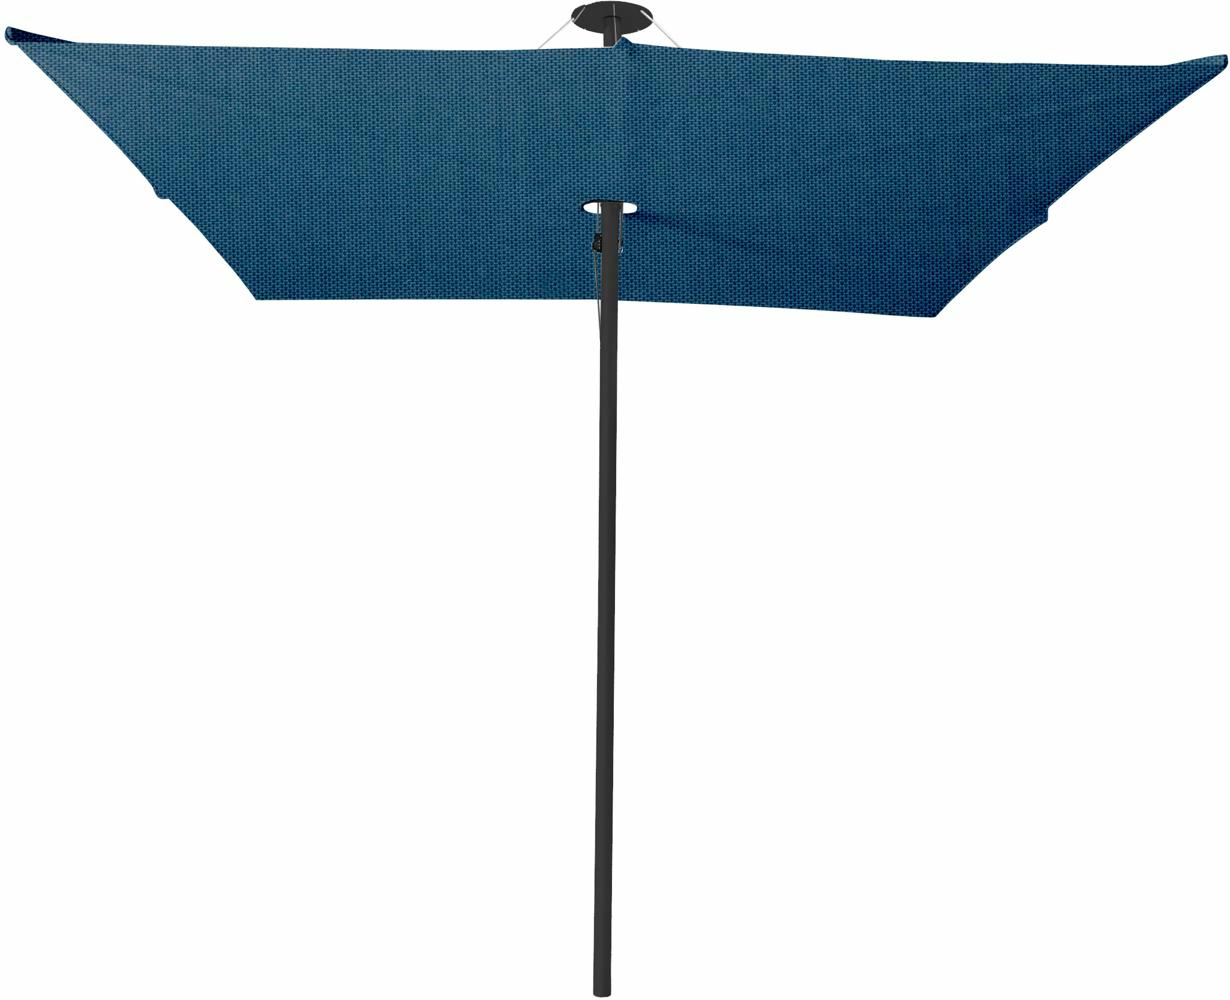 Infina center post umbrella, 3 m square, with frame in Black  and Colorum BlueStorm canopy.